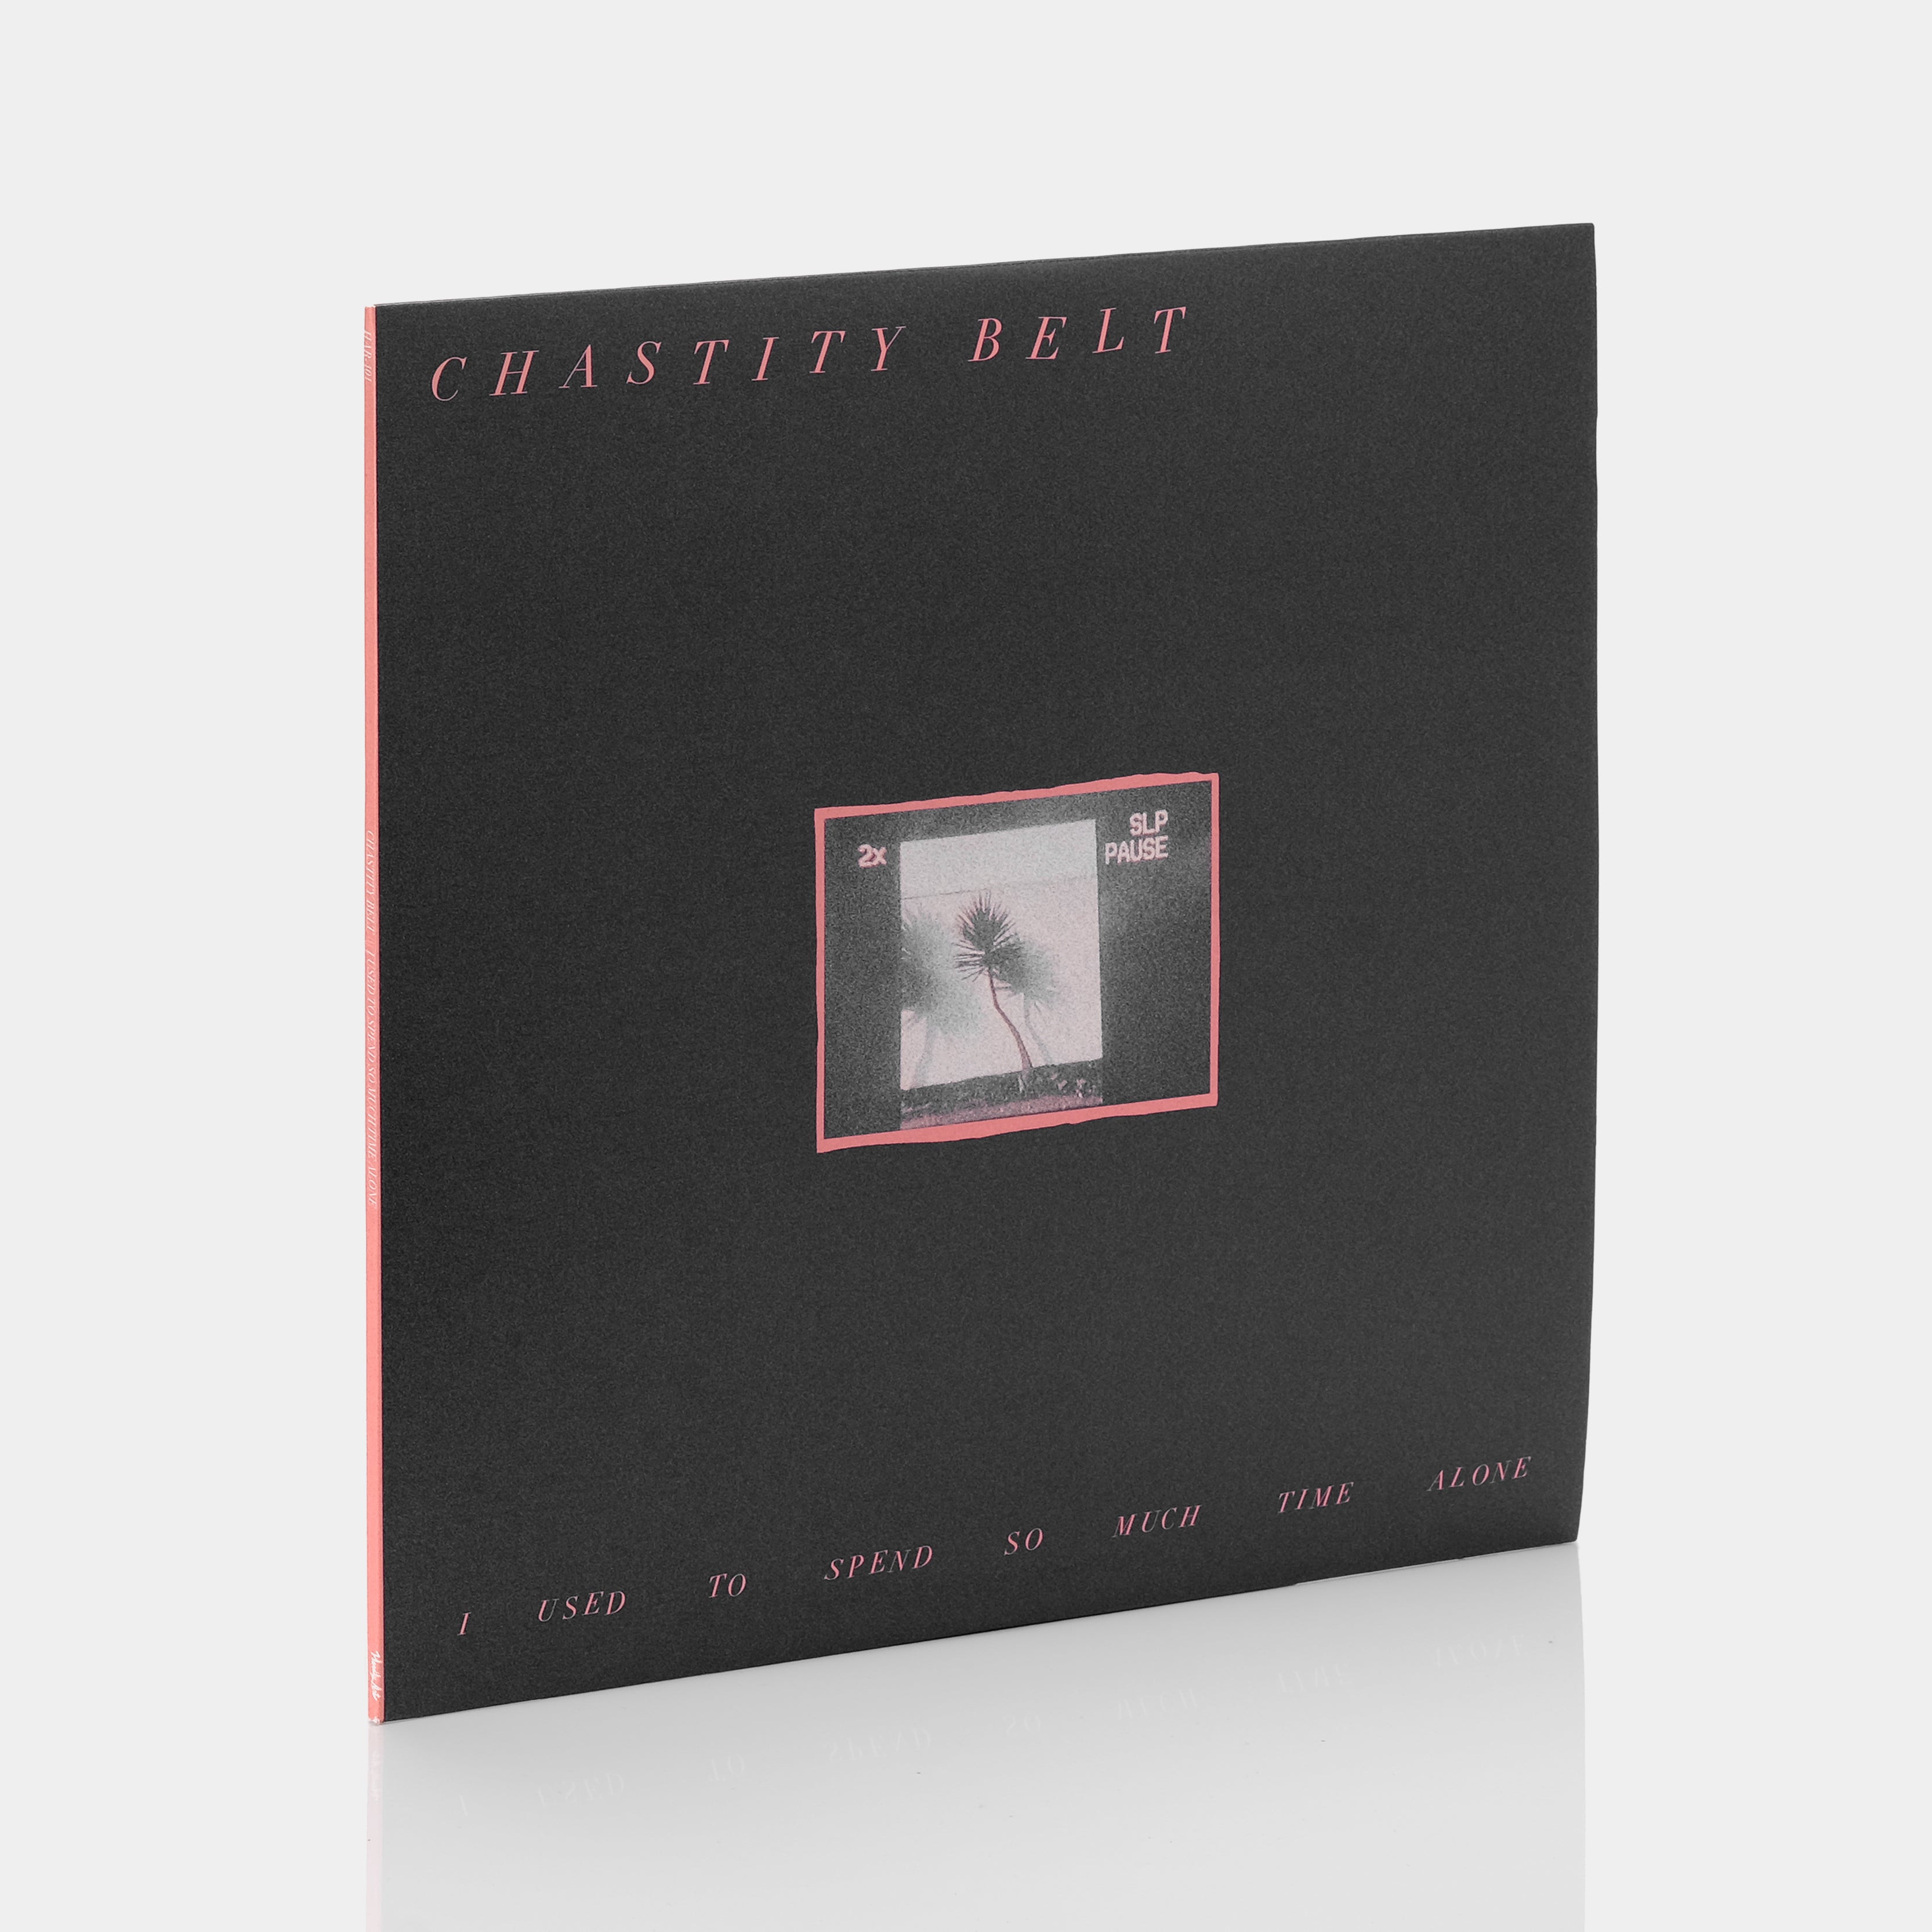 Chastity Belt - I Used To Spend So Much Time Alone LP Vinyl Record